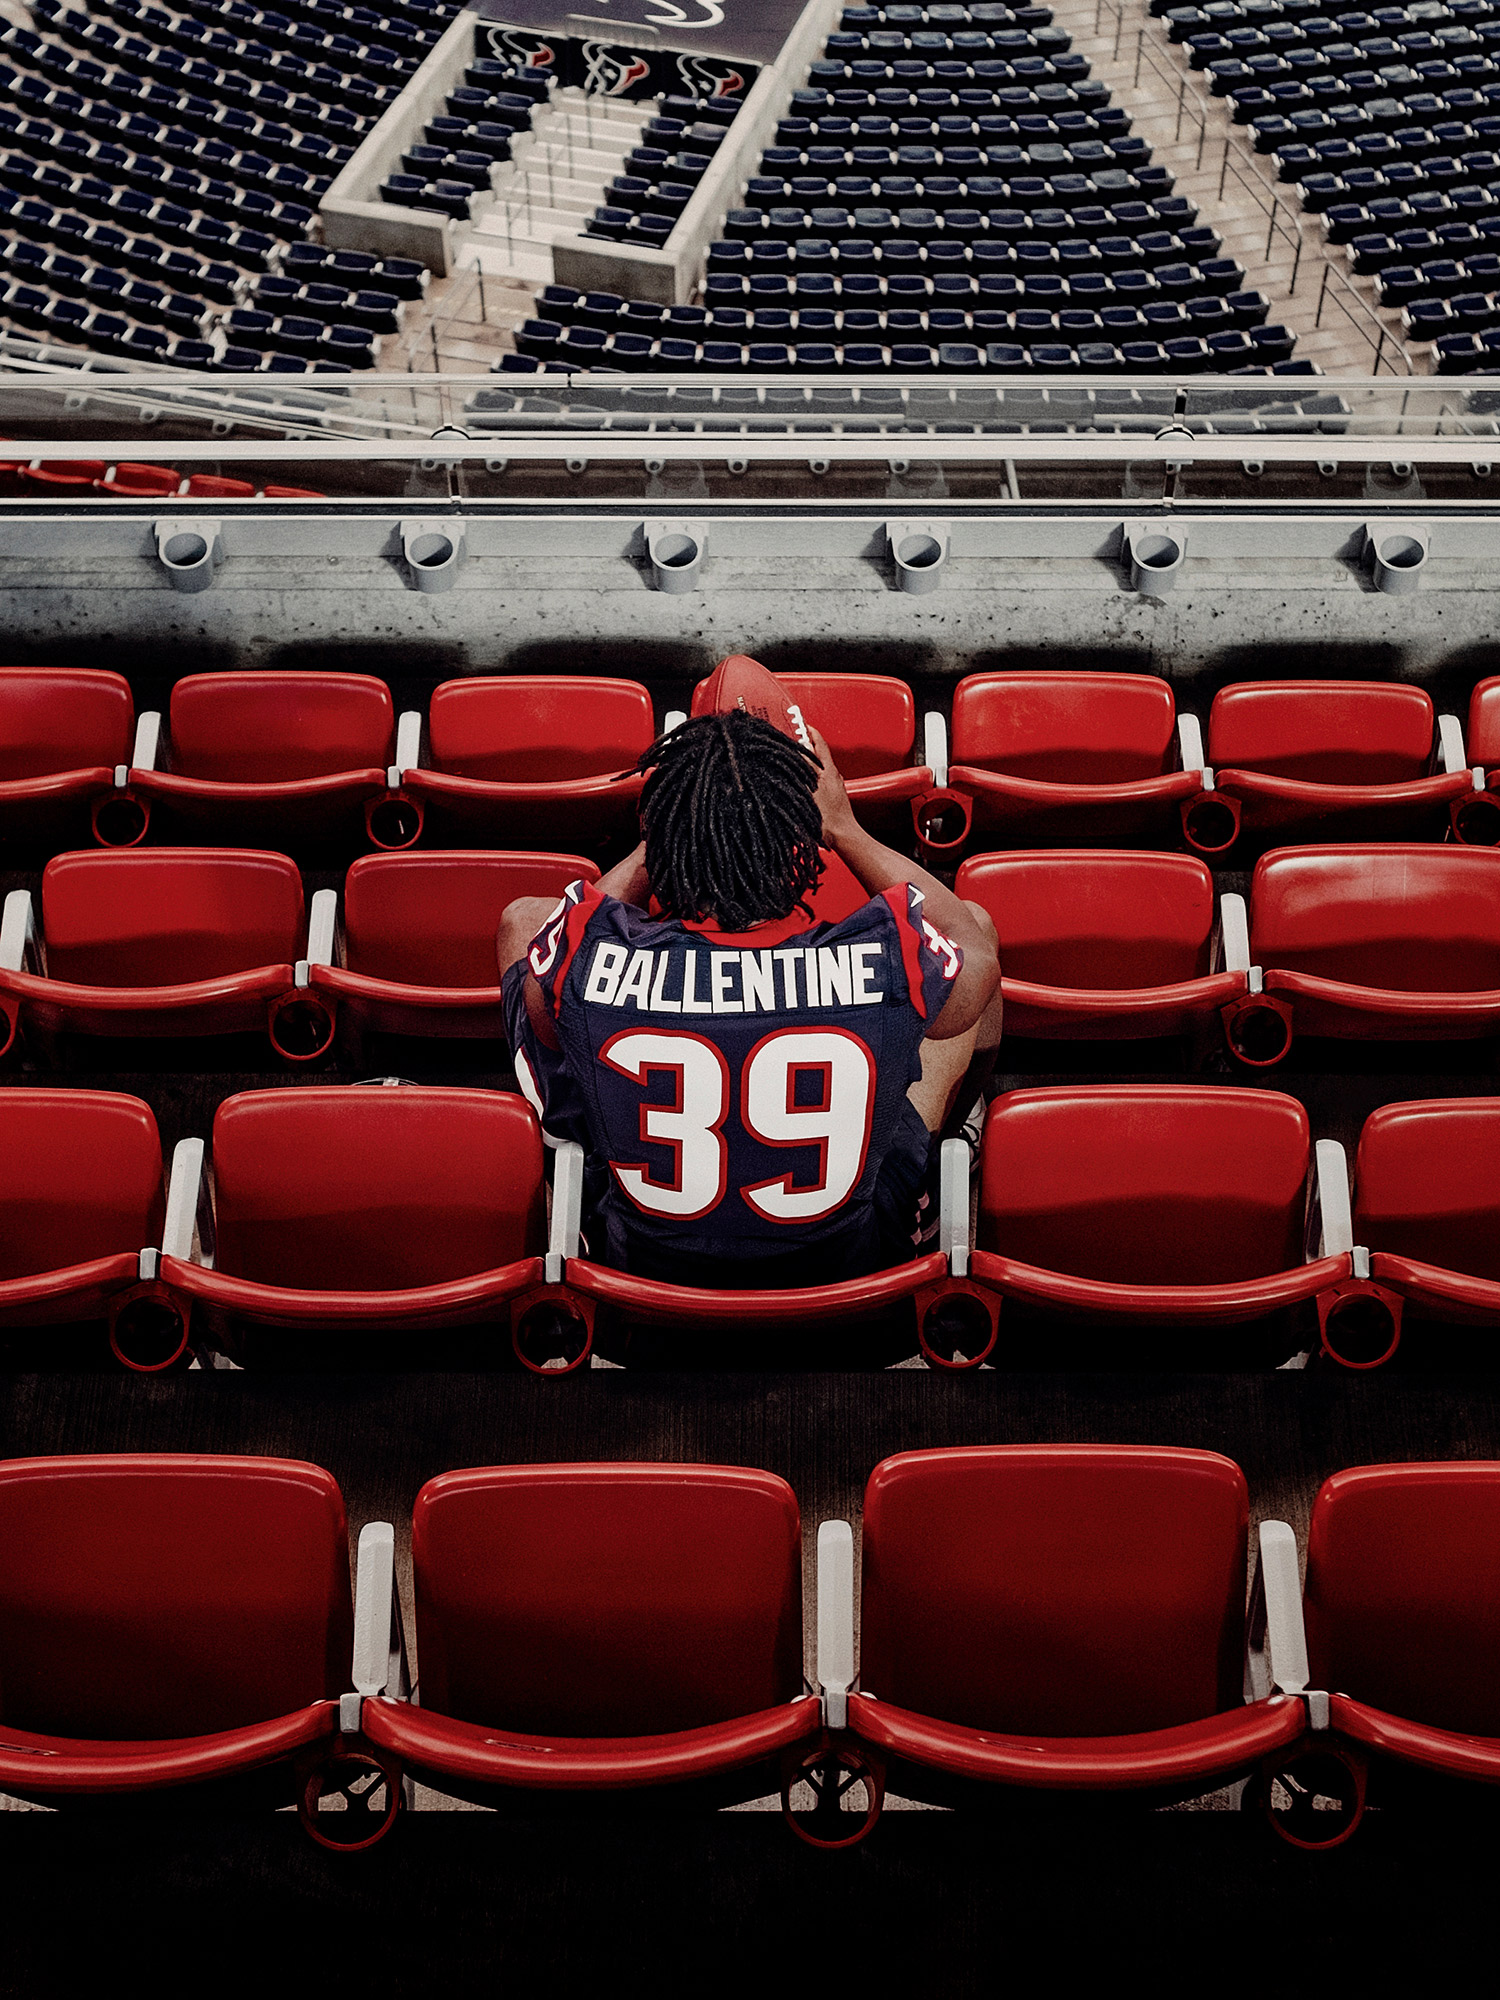 Lonnie Ballentine, Houston Texas NFL player, photographed for the cover of Southwest The Magazine by Houston editorial photographer, Todd Spoth.